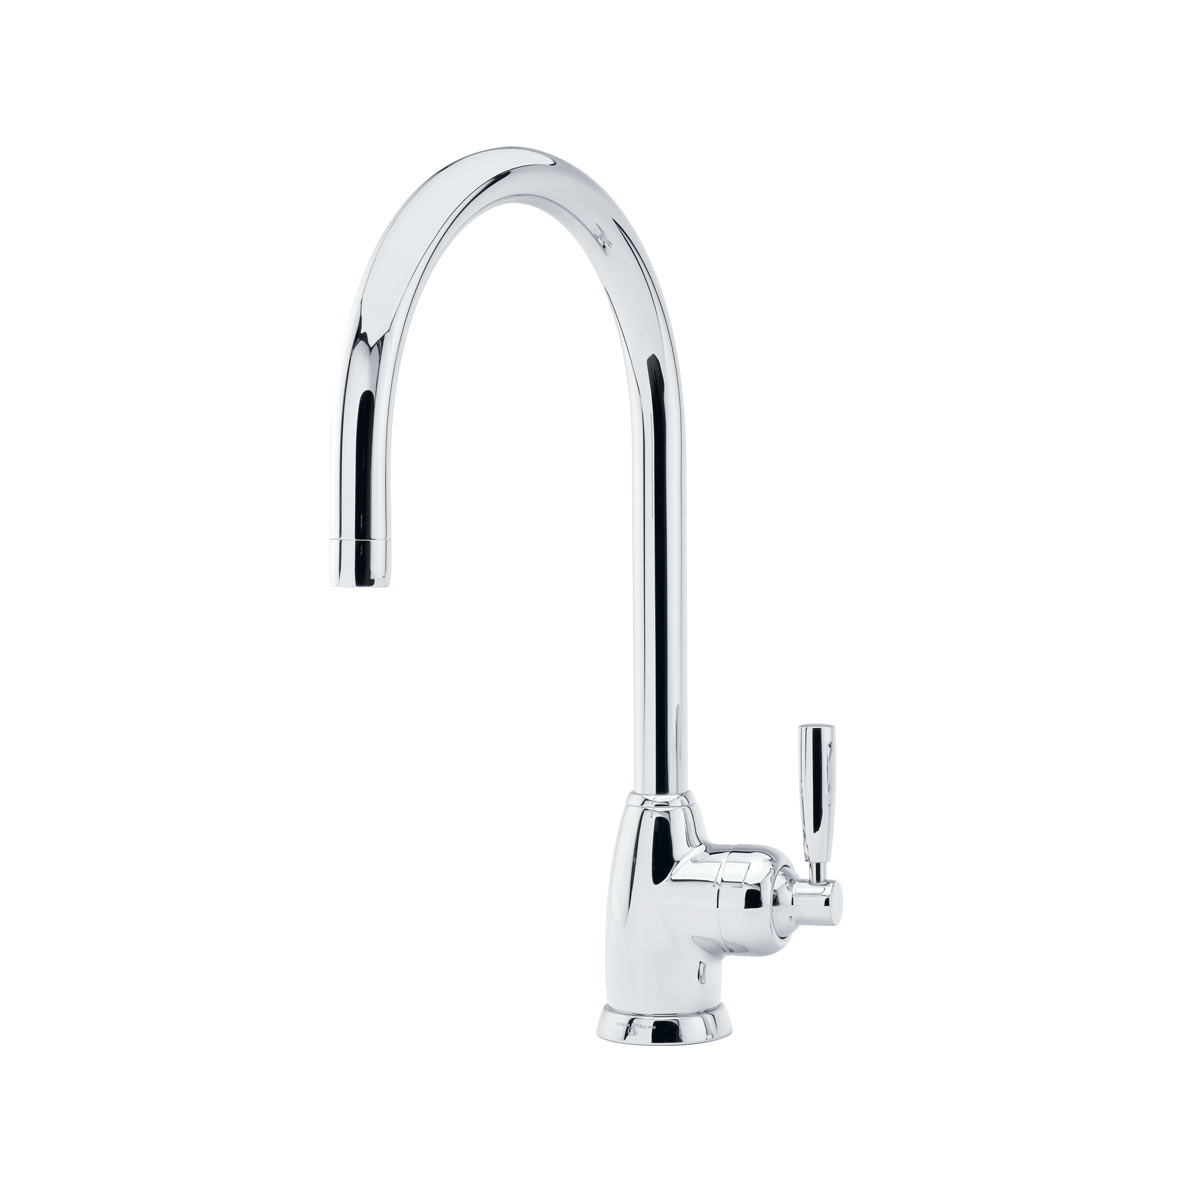 Shaws by Perrin & Rowe Roeburn kitchen mixer in Chrome. Mimas style monobloc kitchen tap AUSH.4841. Distributed in Australia by Luxe by Design, Brisbane.